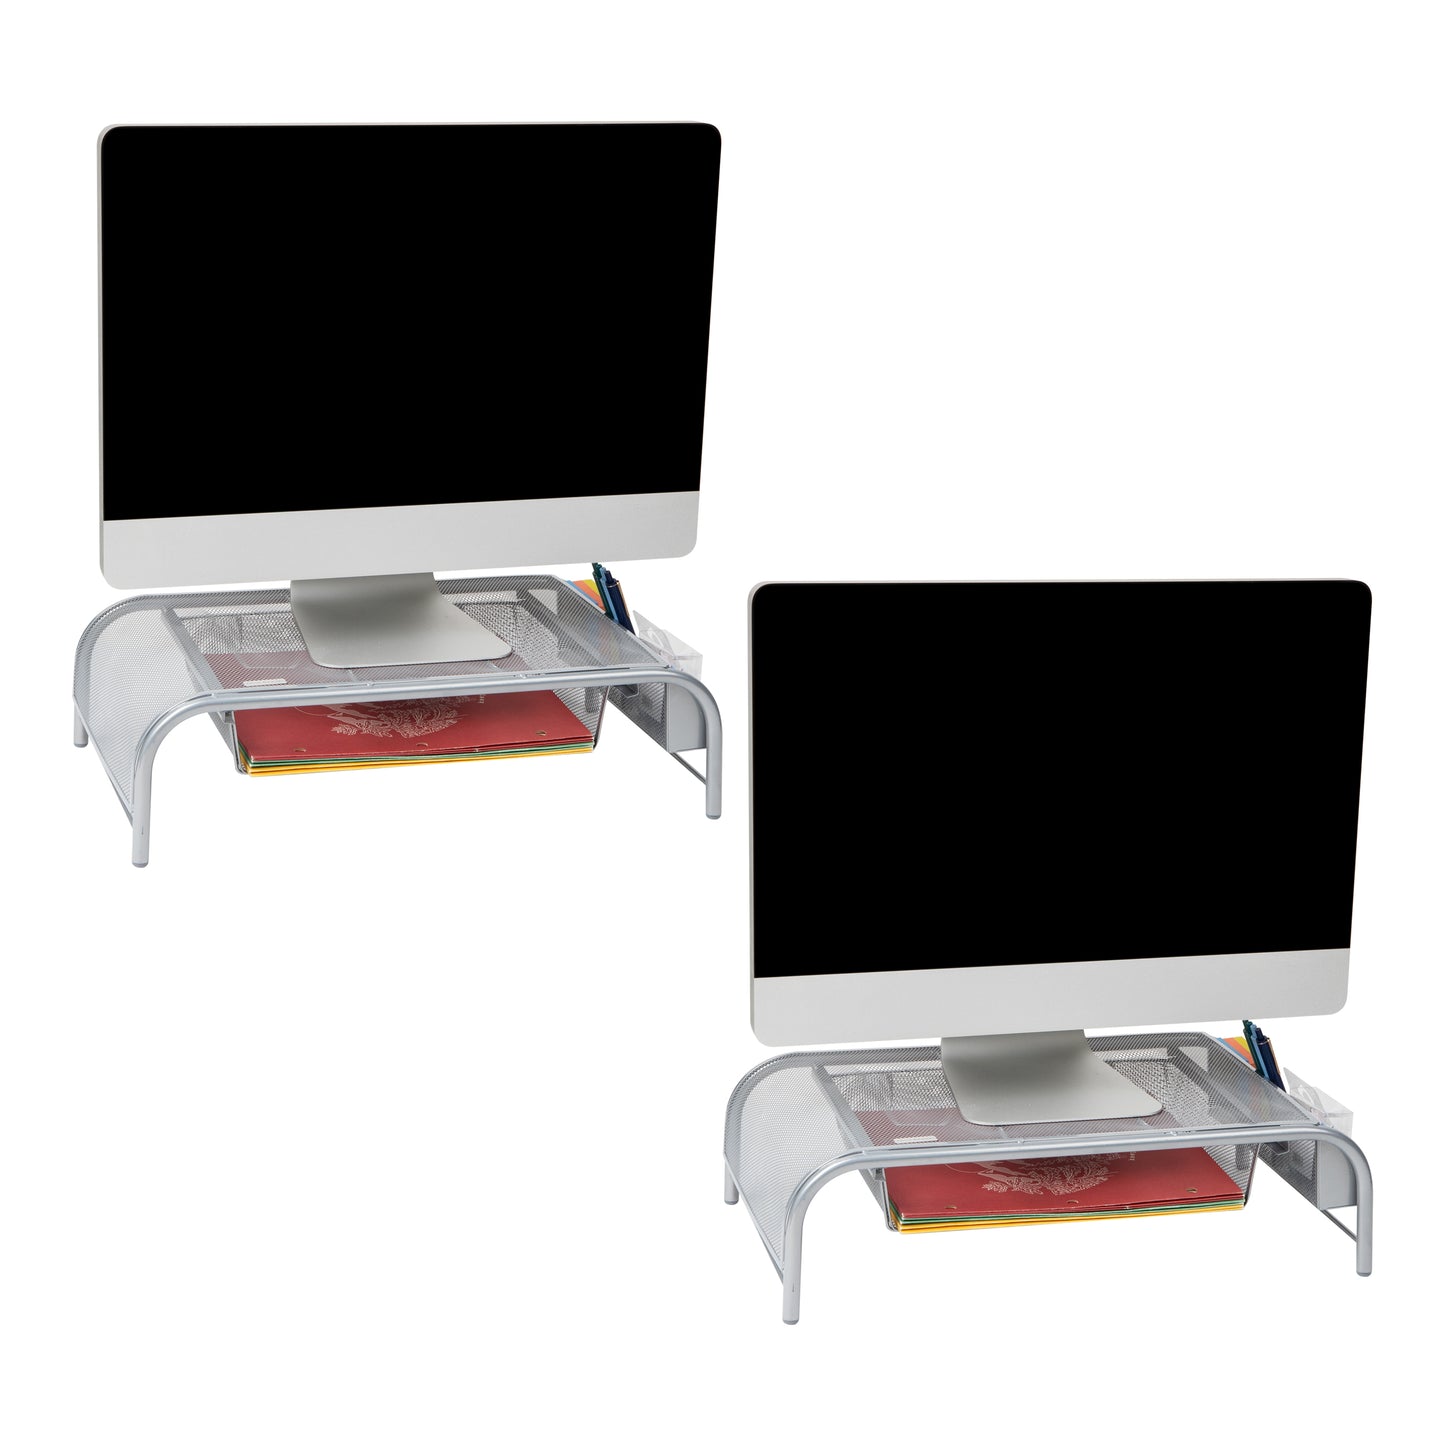 Mind Reader Monitor Stand, Ventilated Laptop Riser, Paper Tray, Office, Metal Mesh, 20"L x 11.5"W x 5.5"H, Set of 2